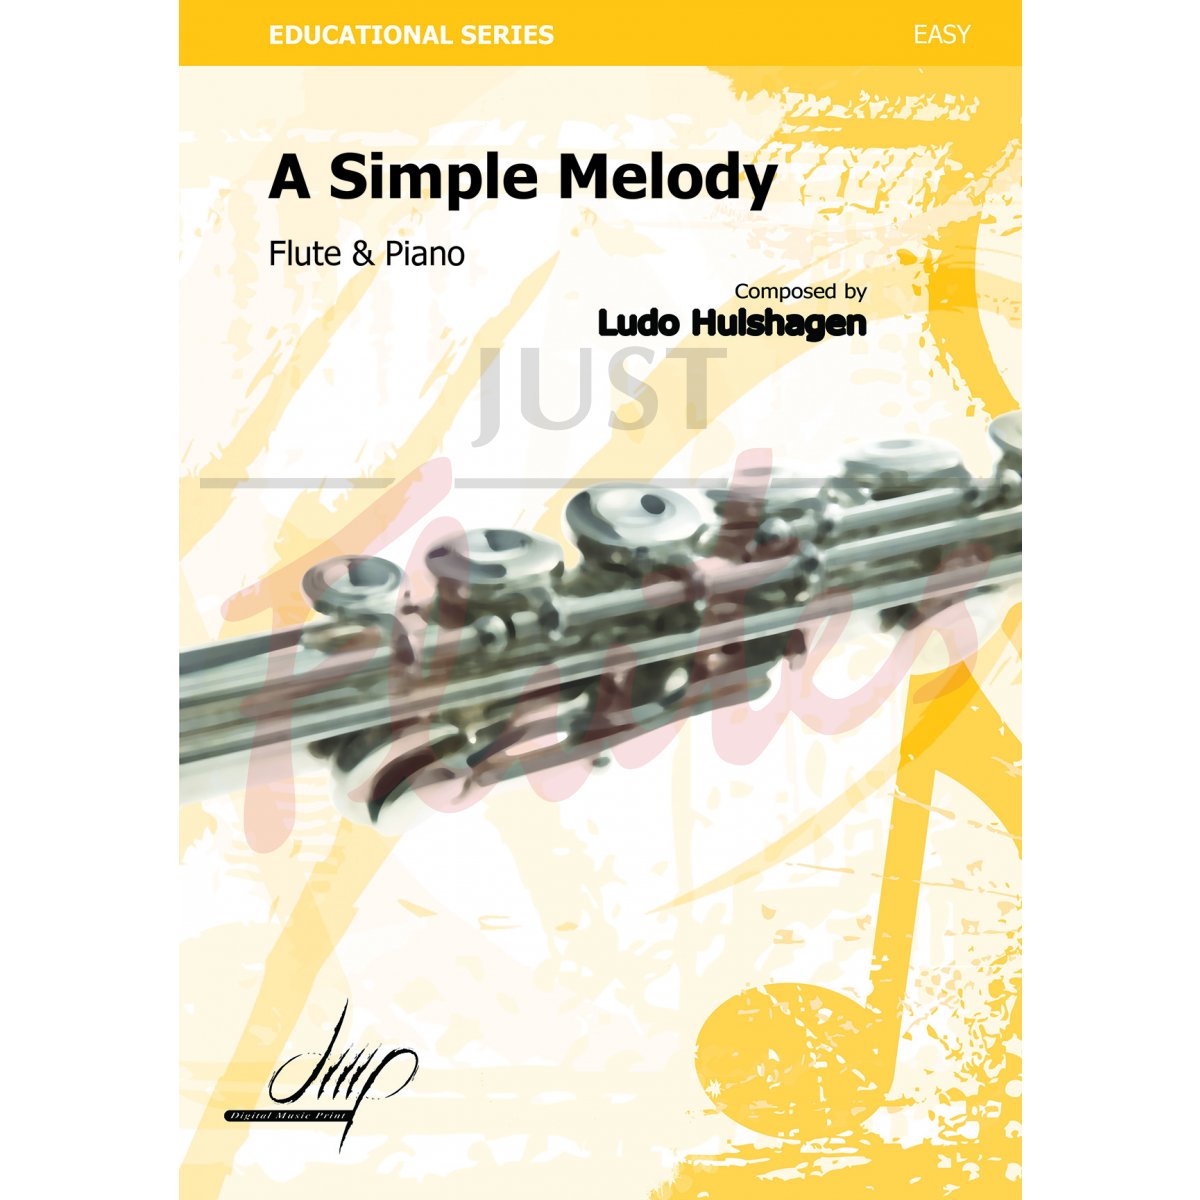 A Simple Melody